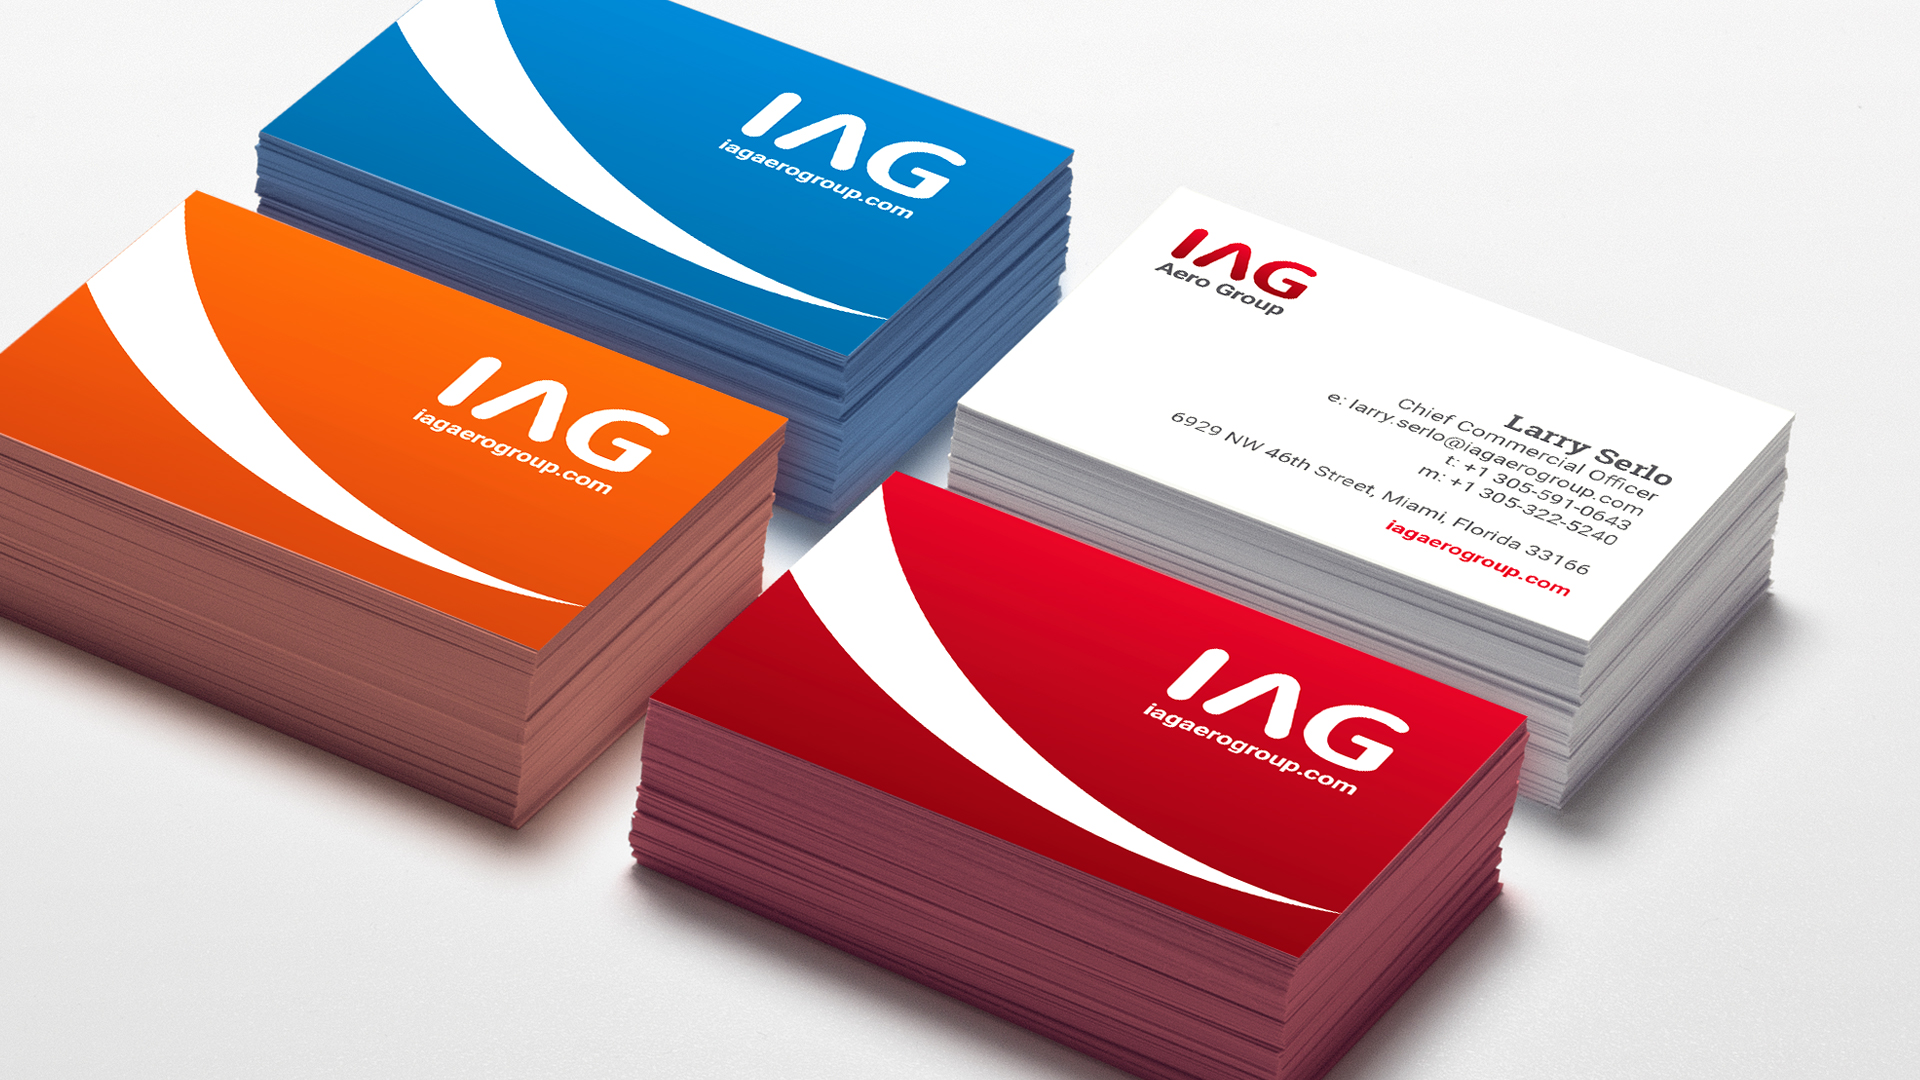 IAG Aero Group rebranded business cards